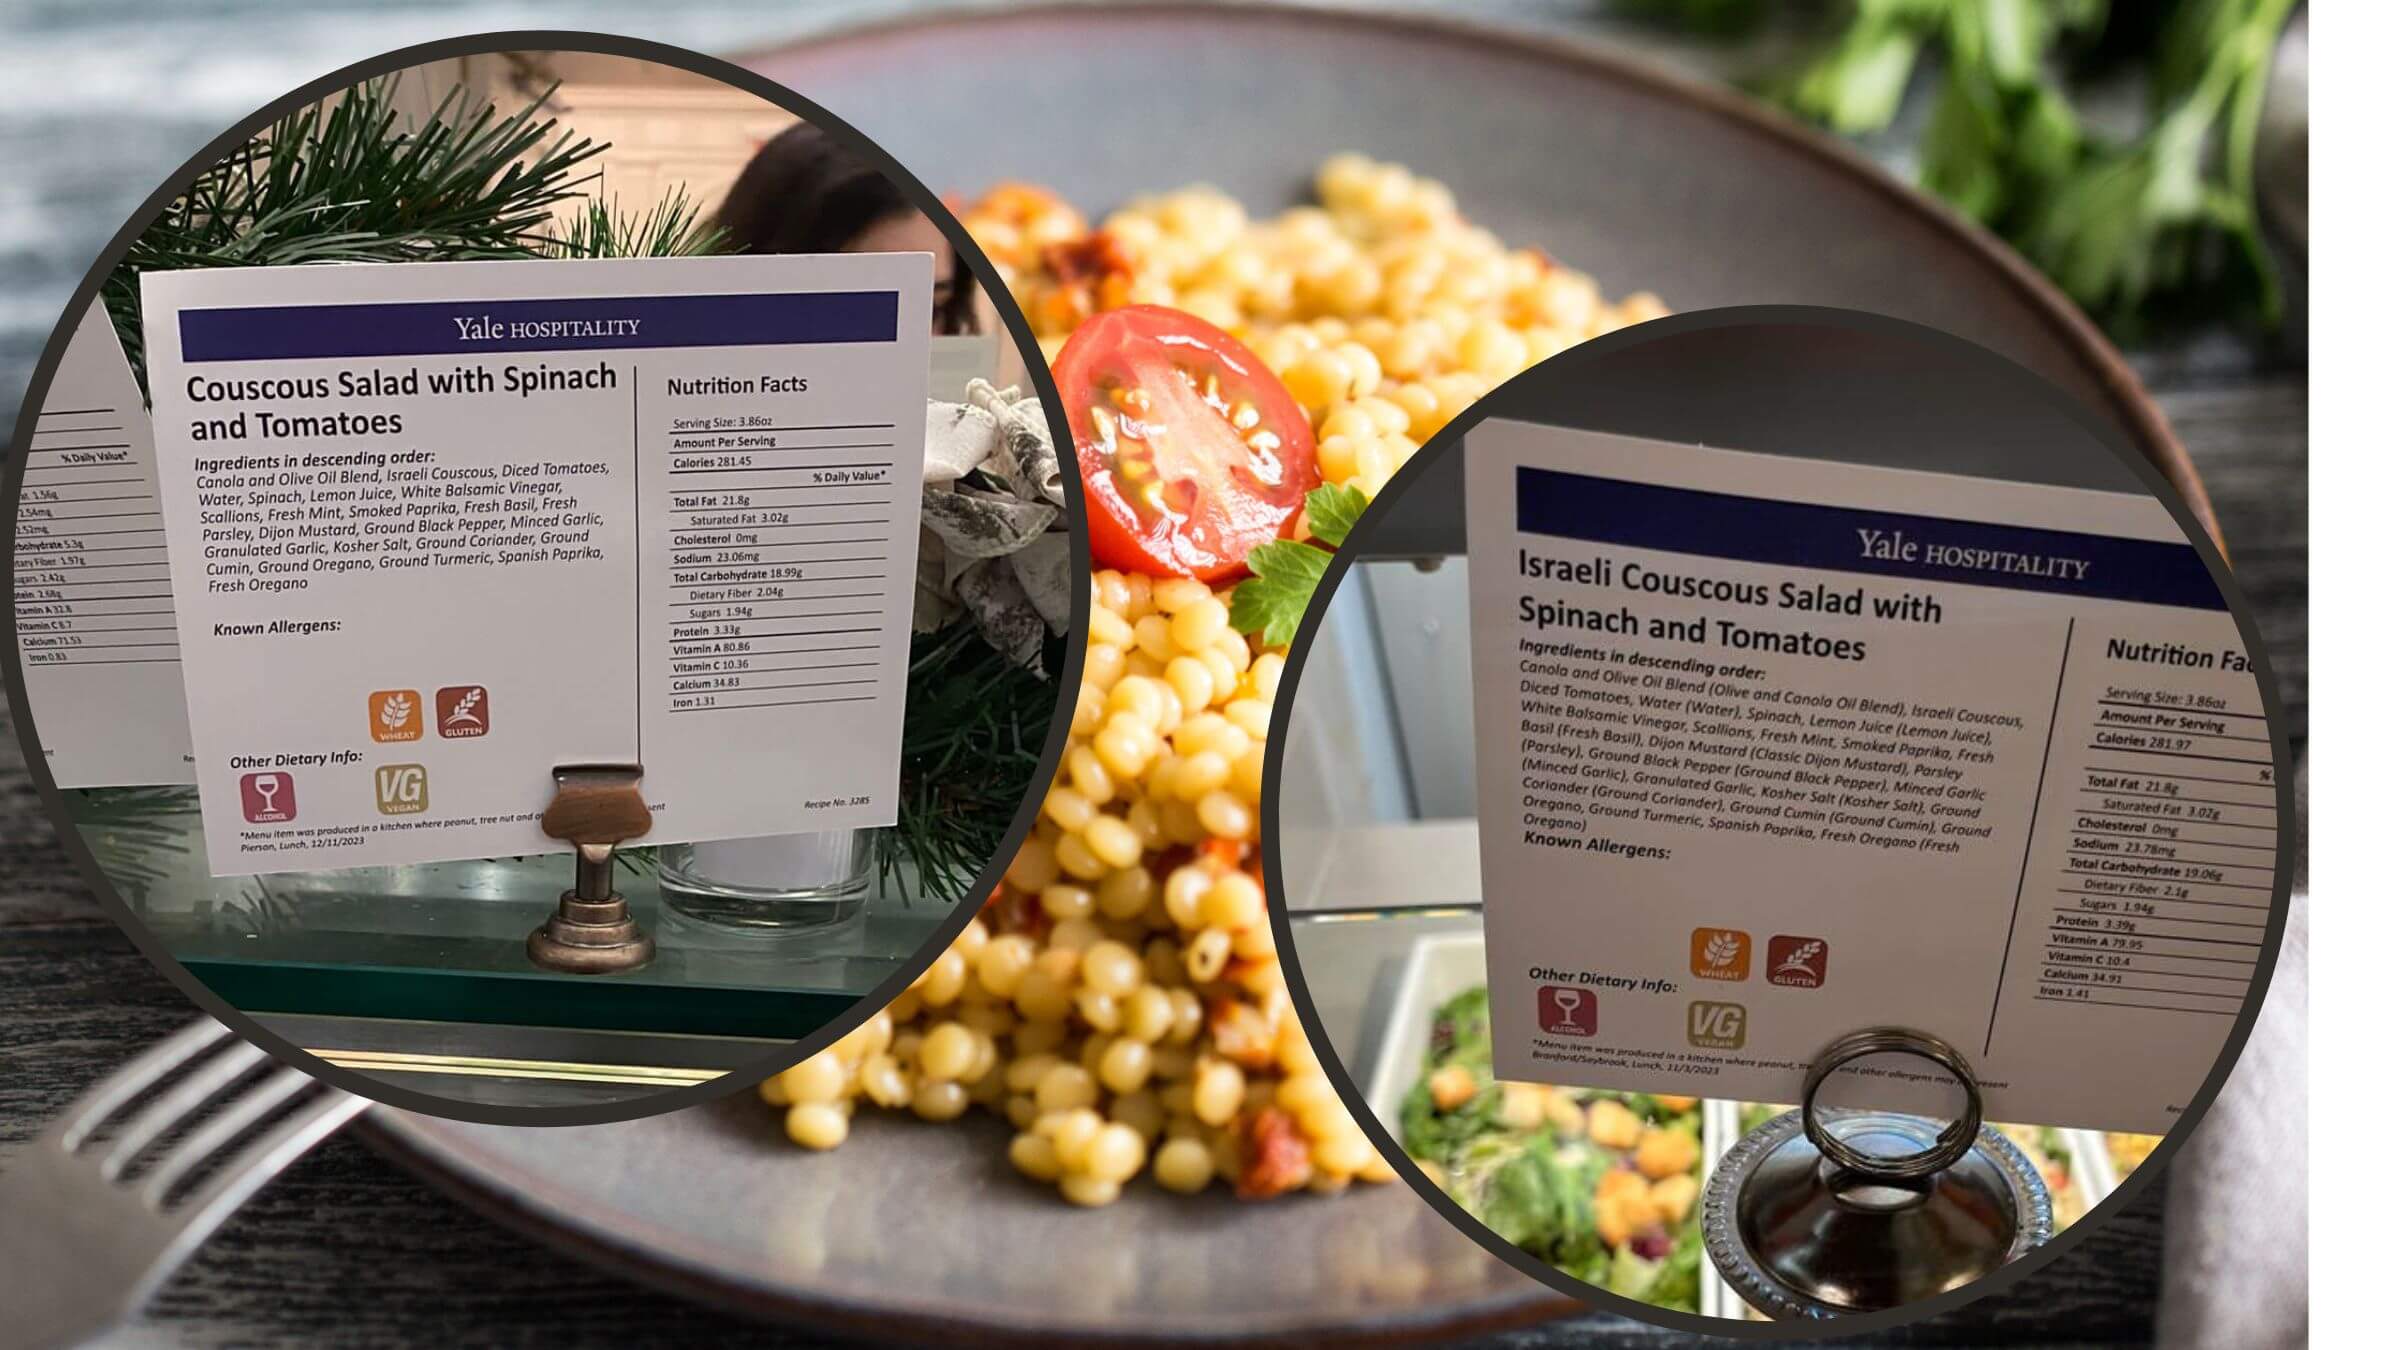 Signs from Yale dining halls describe couscous salad with and without the term 'Israeli.'